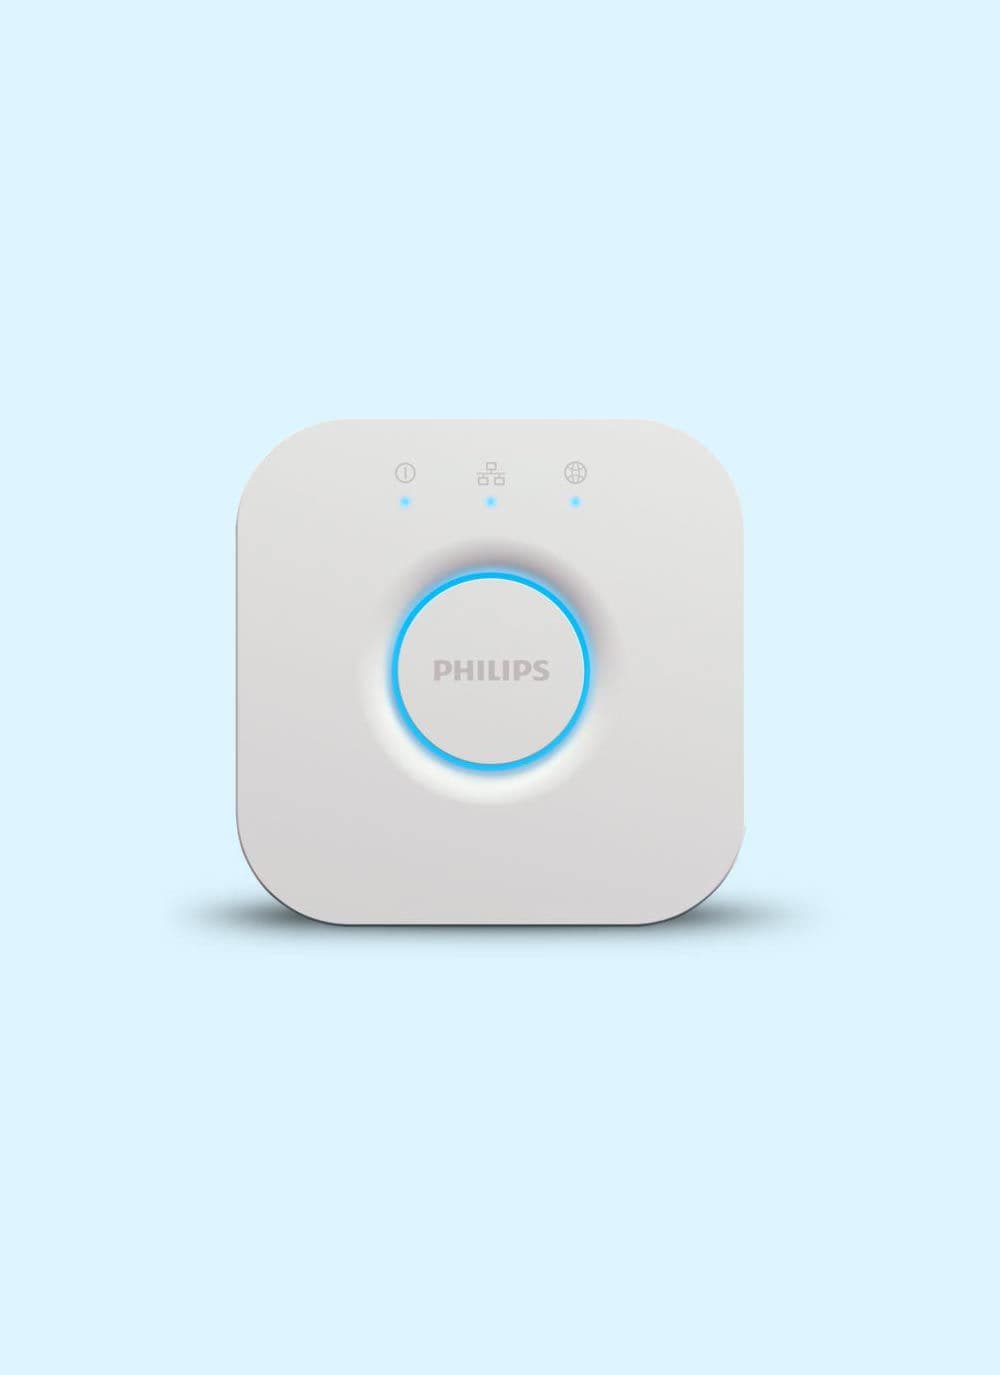 Philips Hue Accessories